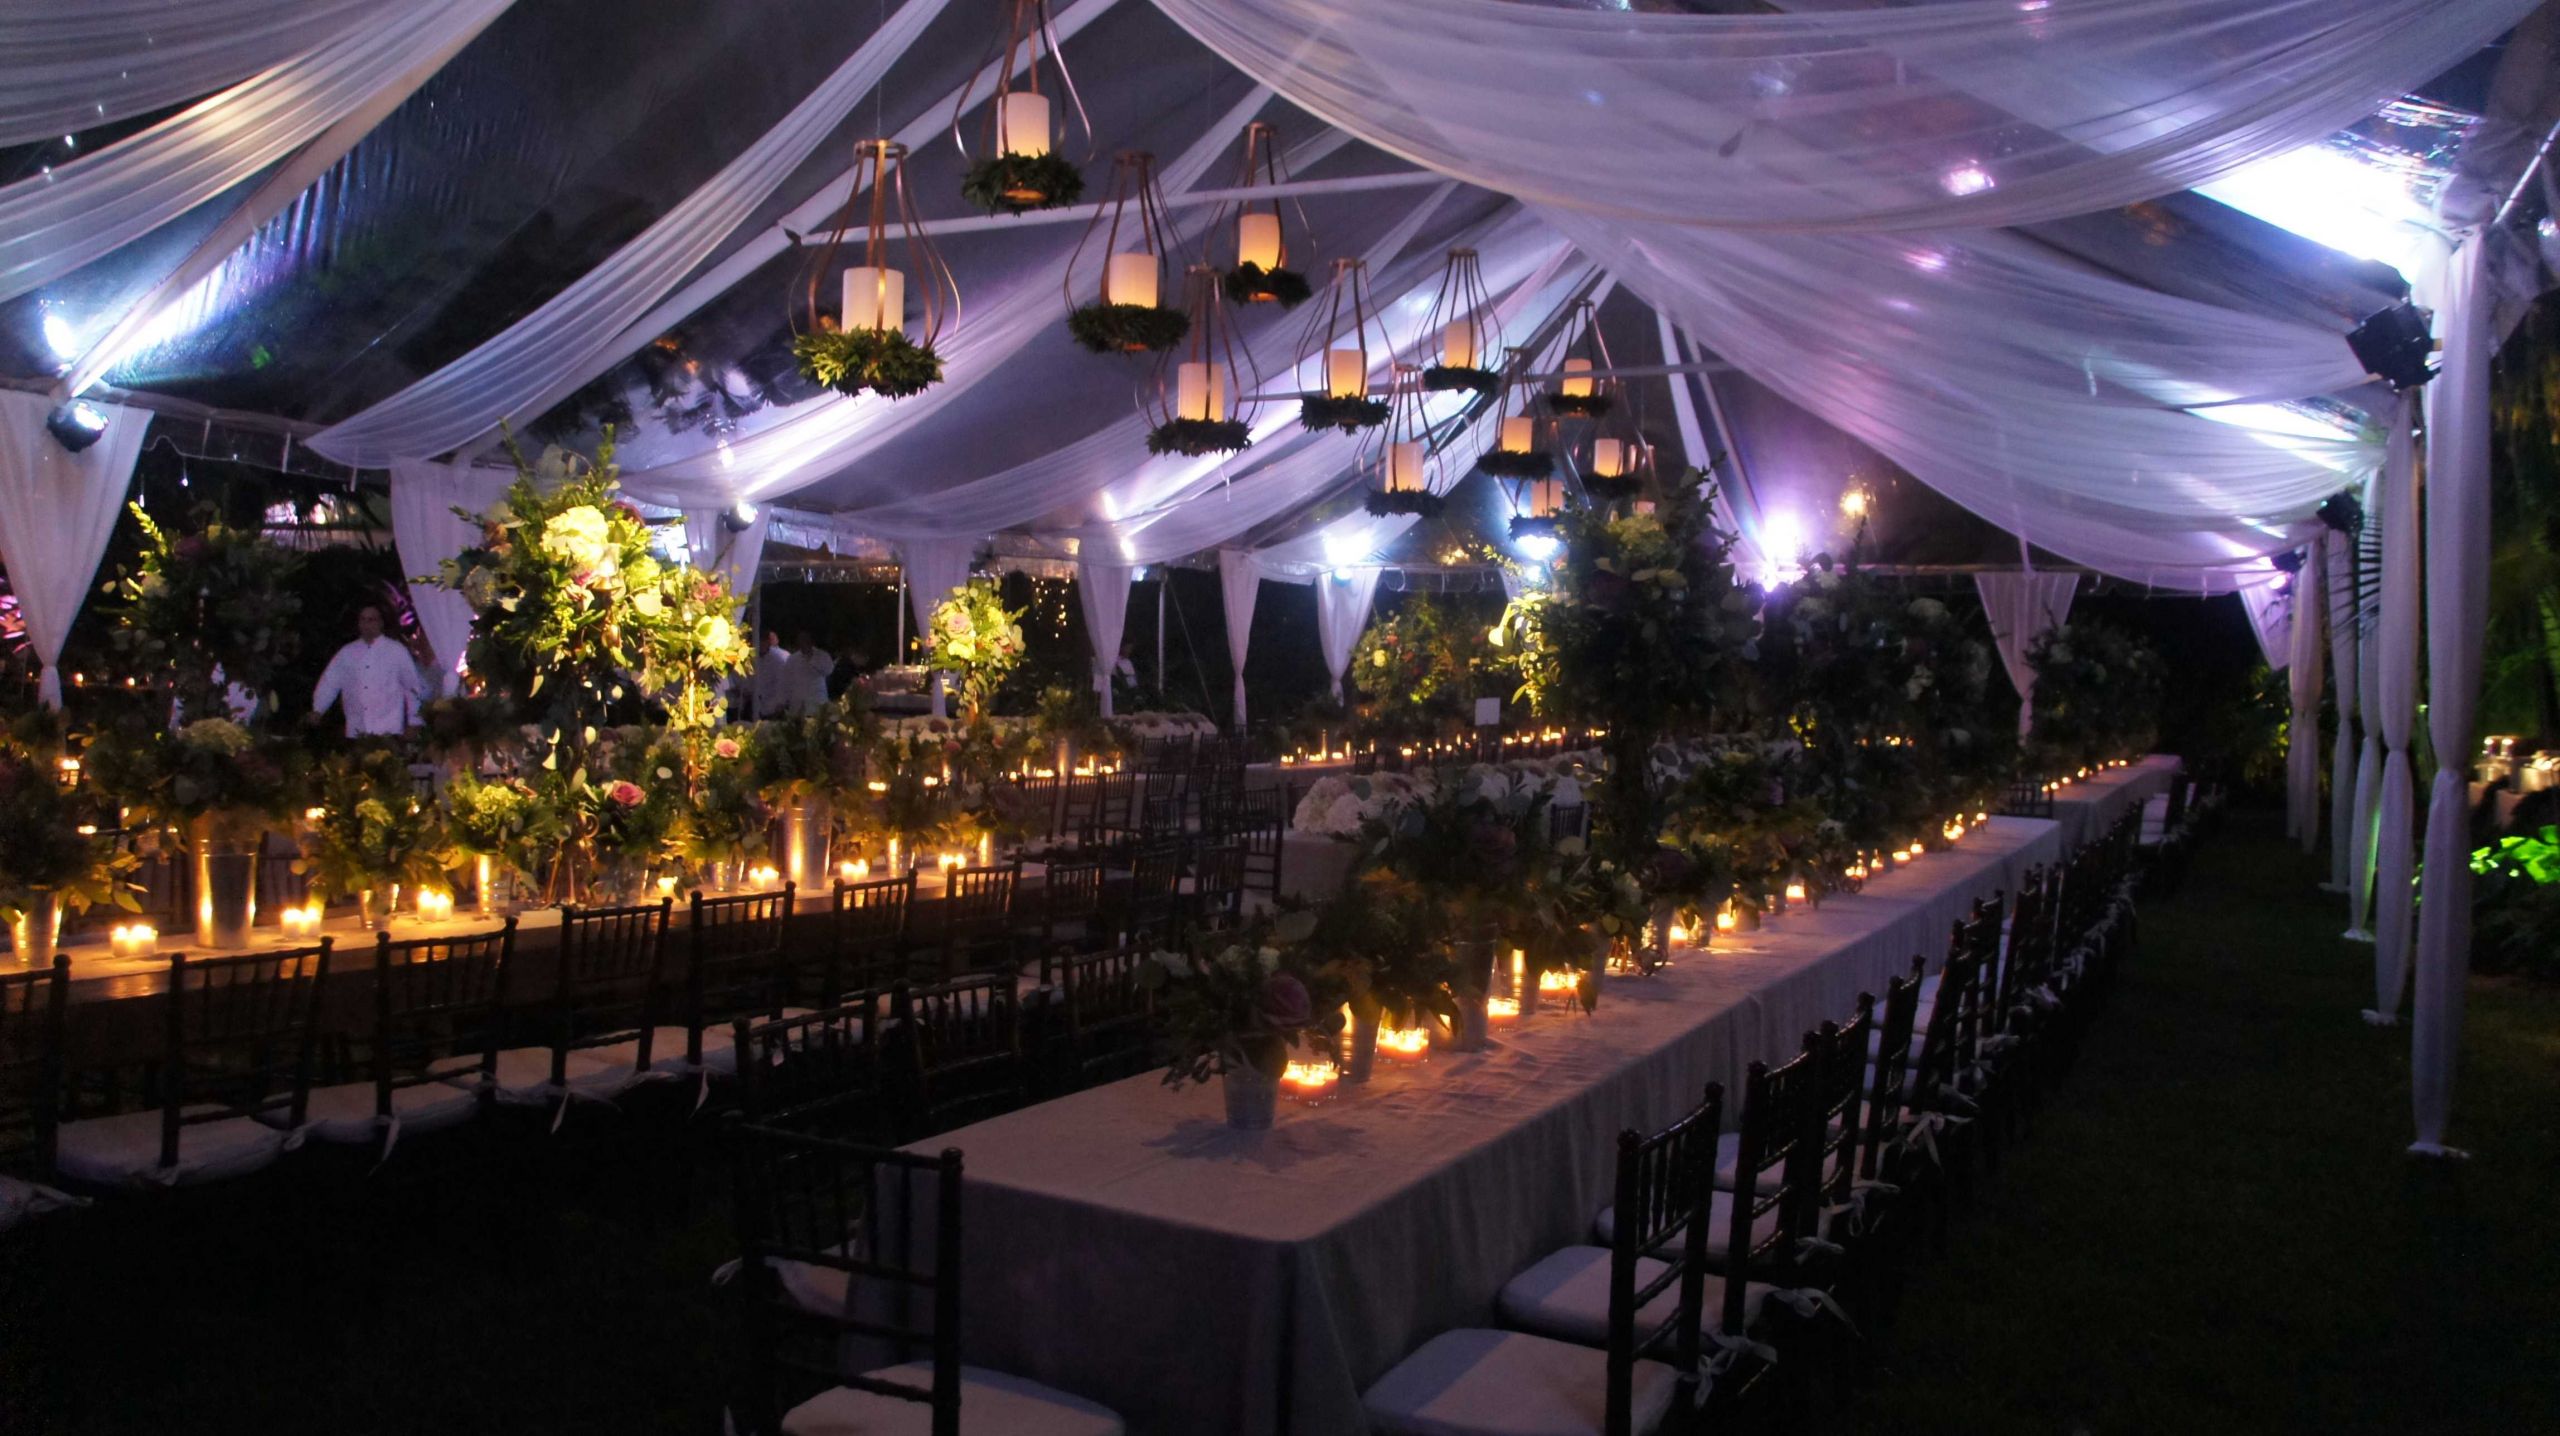 Outdoor Lighting Ideas For Backyard Party
 9 Great Party Tent Lighting Ideas For Outdoor Events